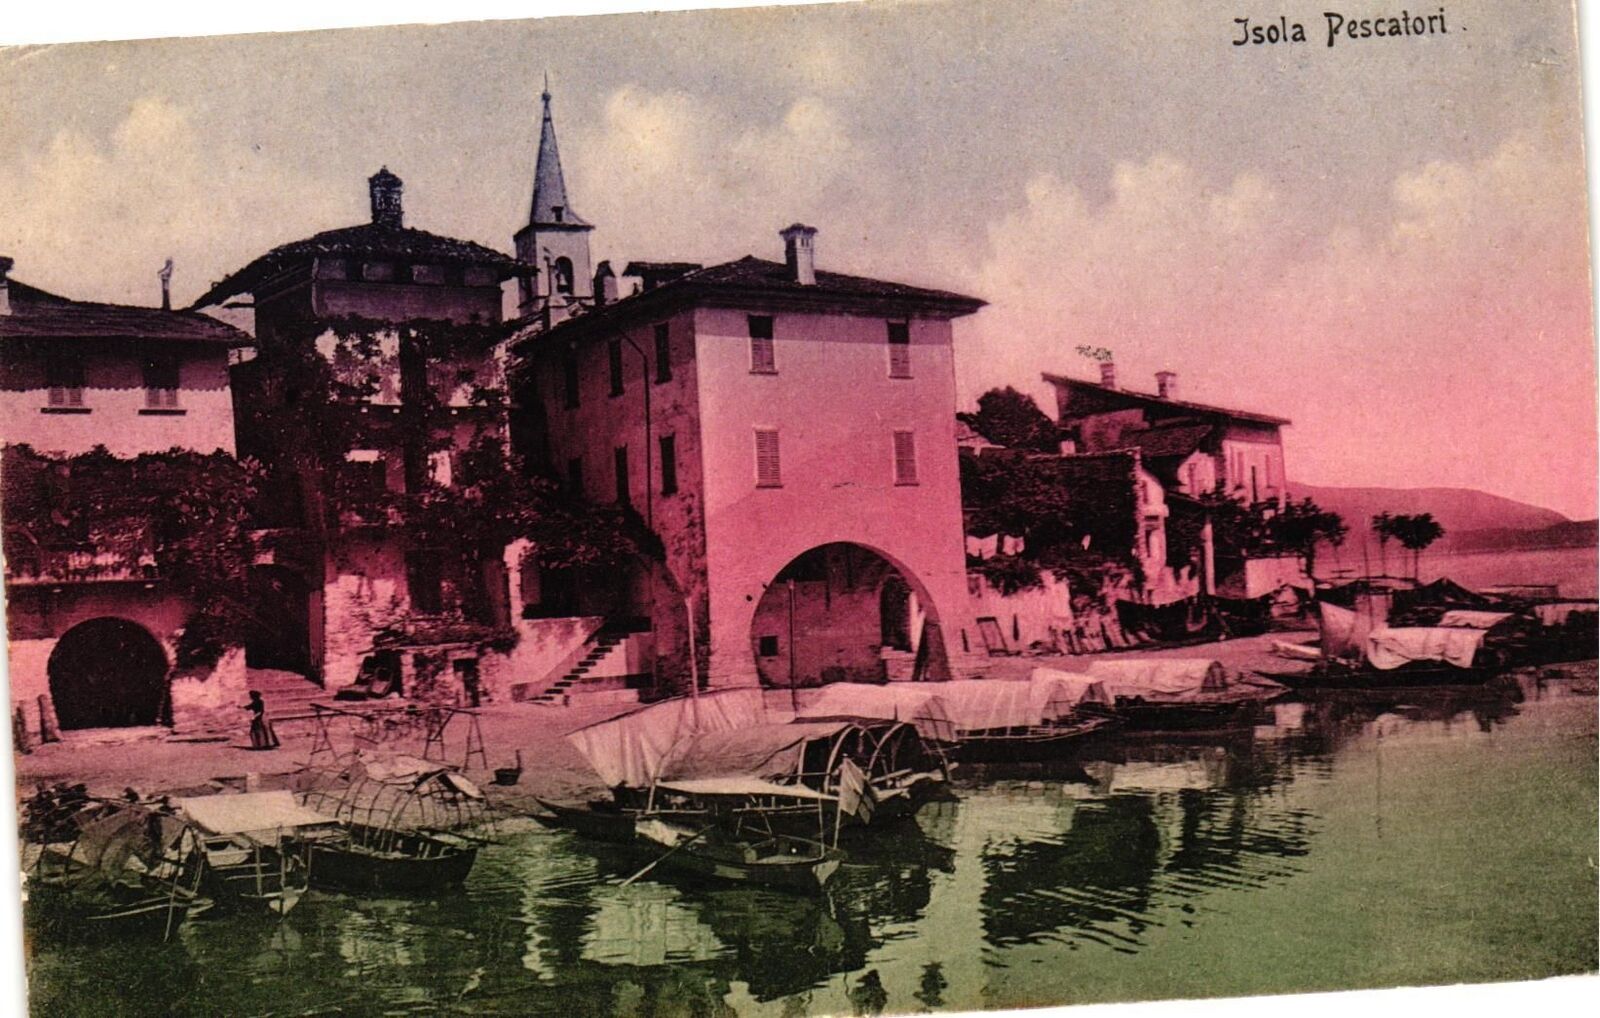 Vintage Postcard- Covered boats on a shore with buildings.